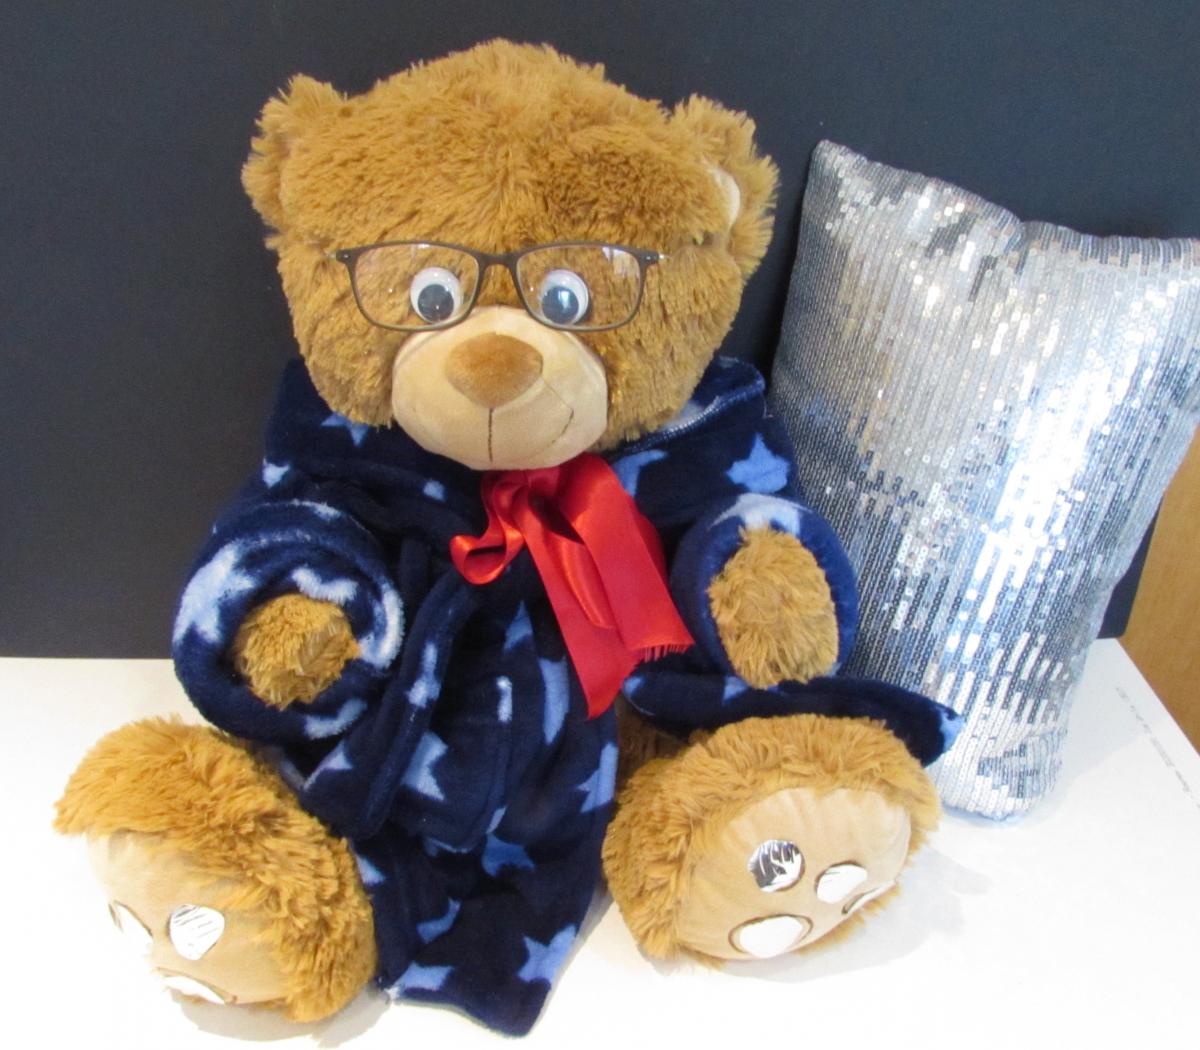 Mr. Bear wearing glasses and a shiny throw pillow